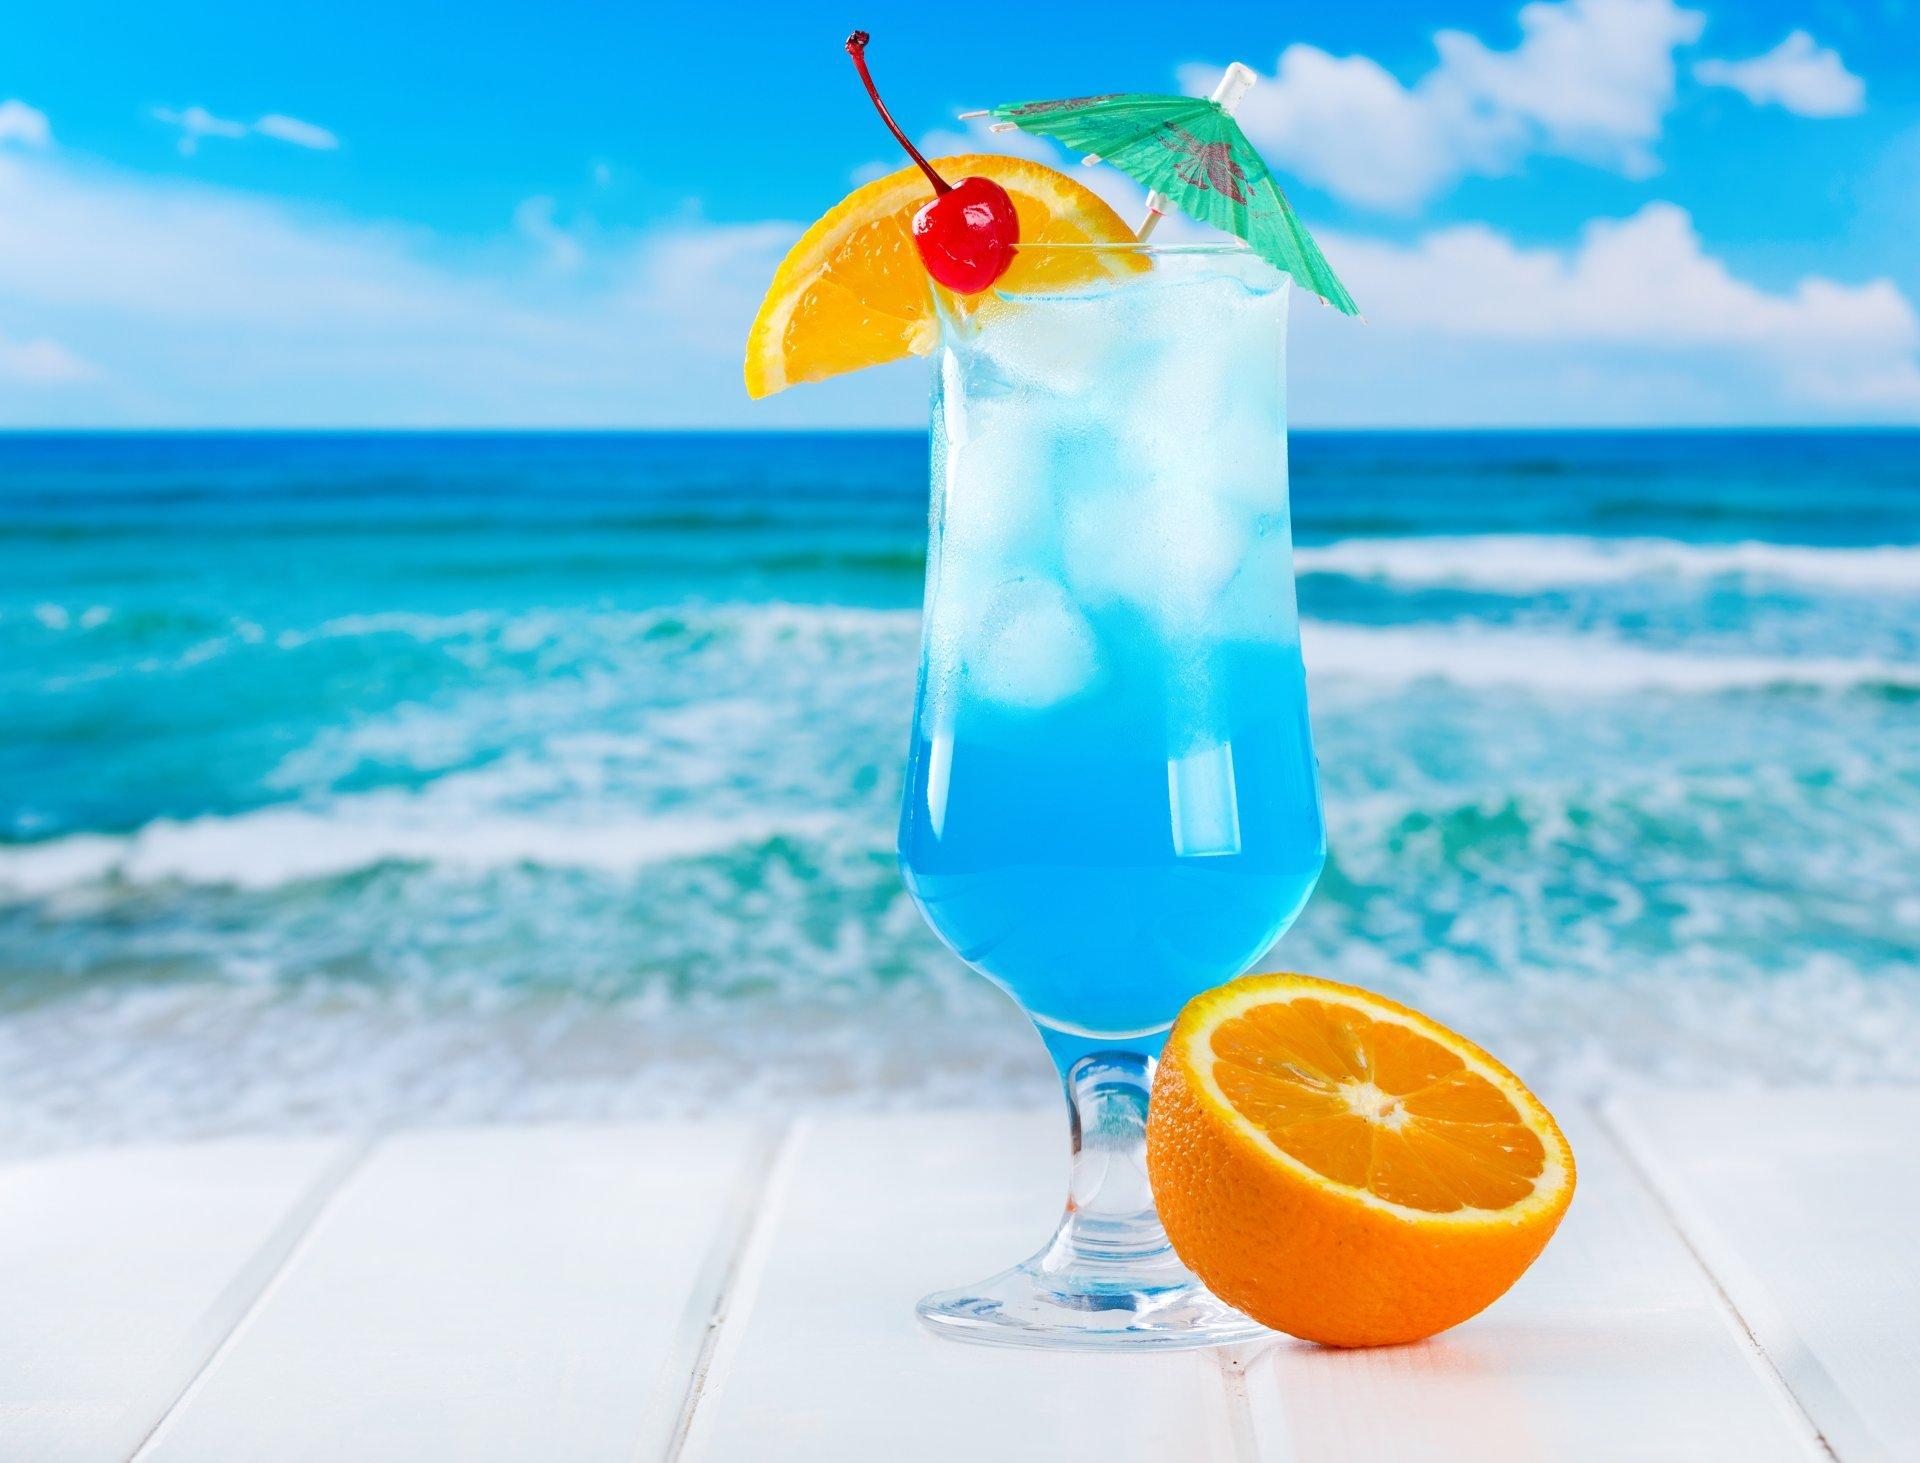 Tropical Drink Wallpapers Top Free Tropical Drink Backgrounds Wallpaperaccess 0584